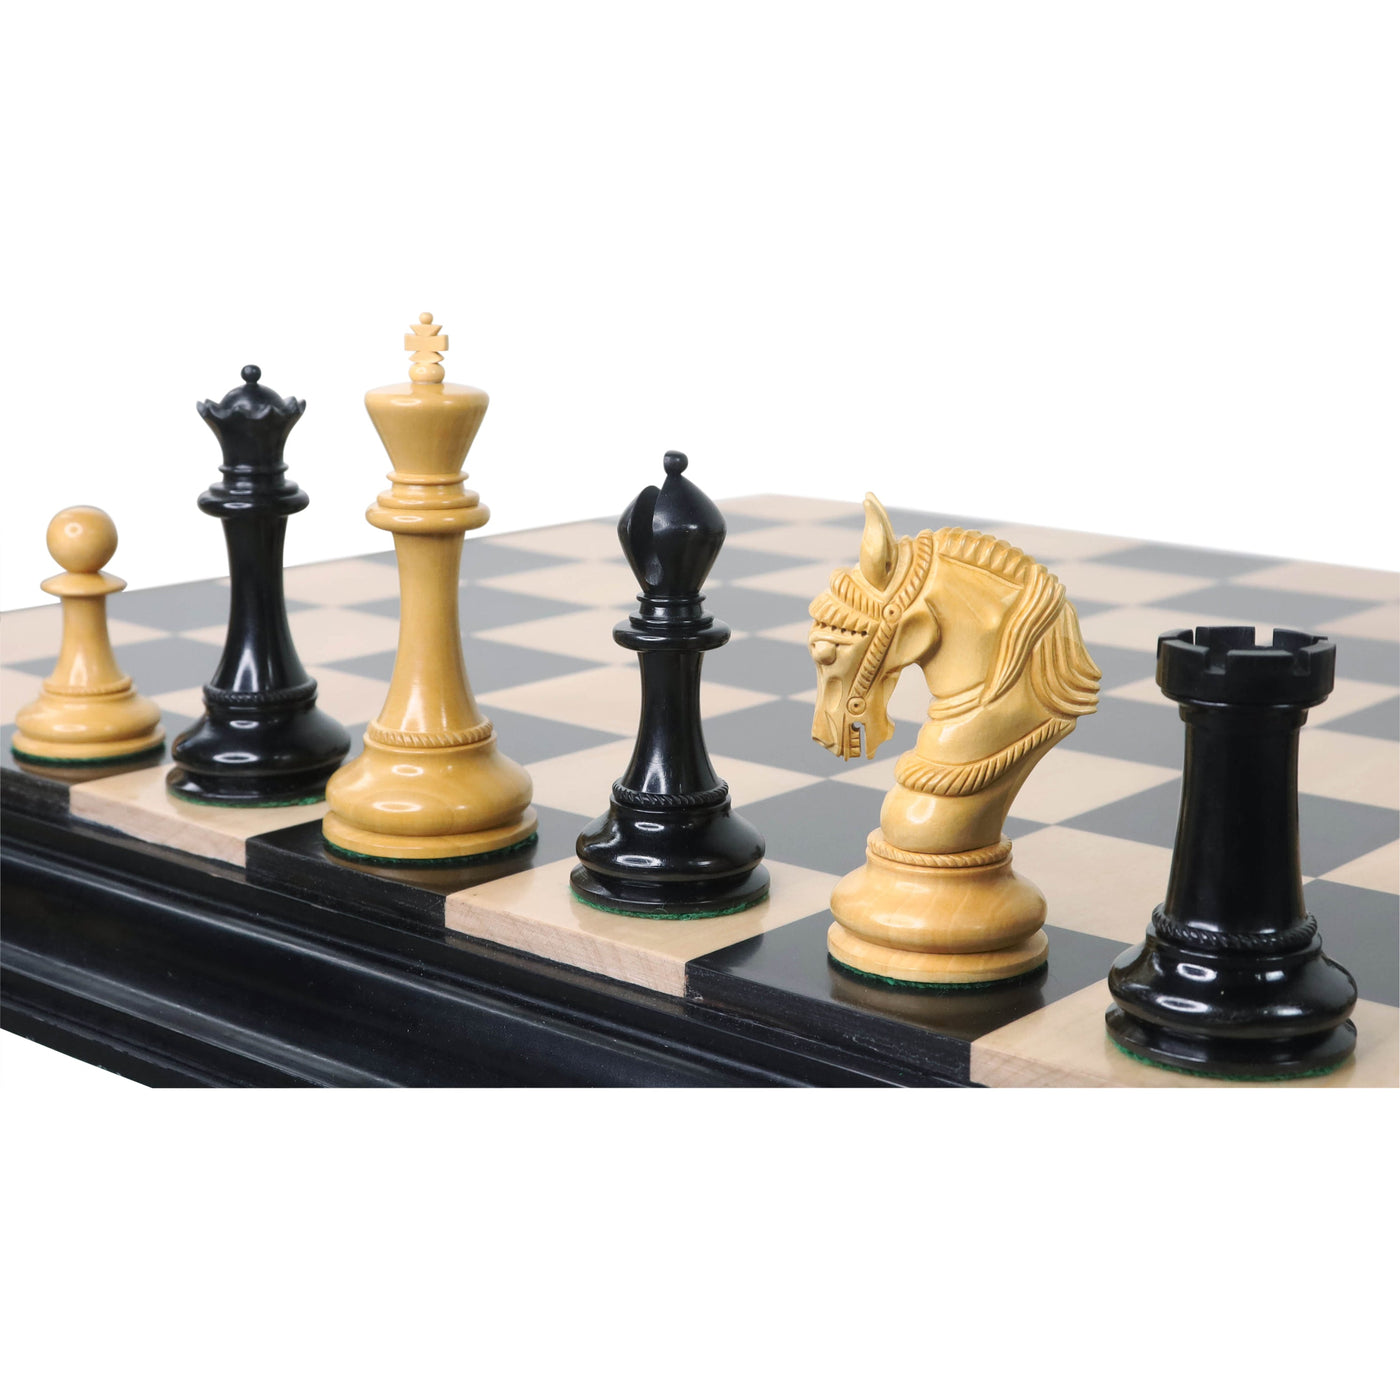 4.5" Imperator Luxury Staunton Chess Set - Chess Pieces Only - Ebony Wood -Triple Weight